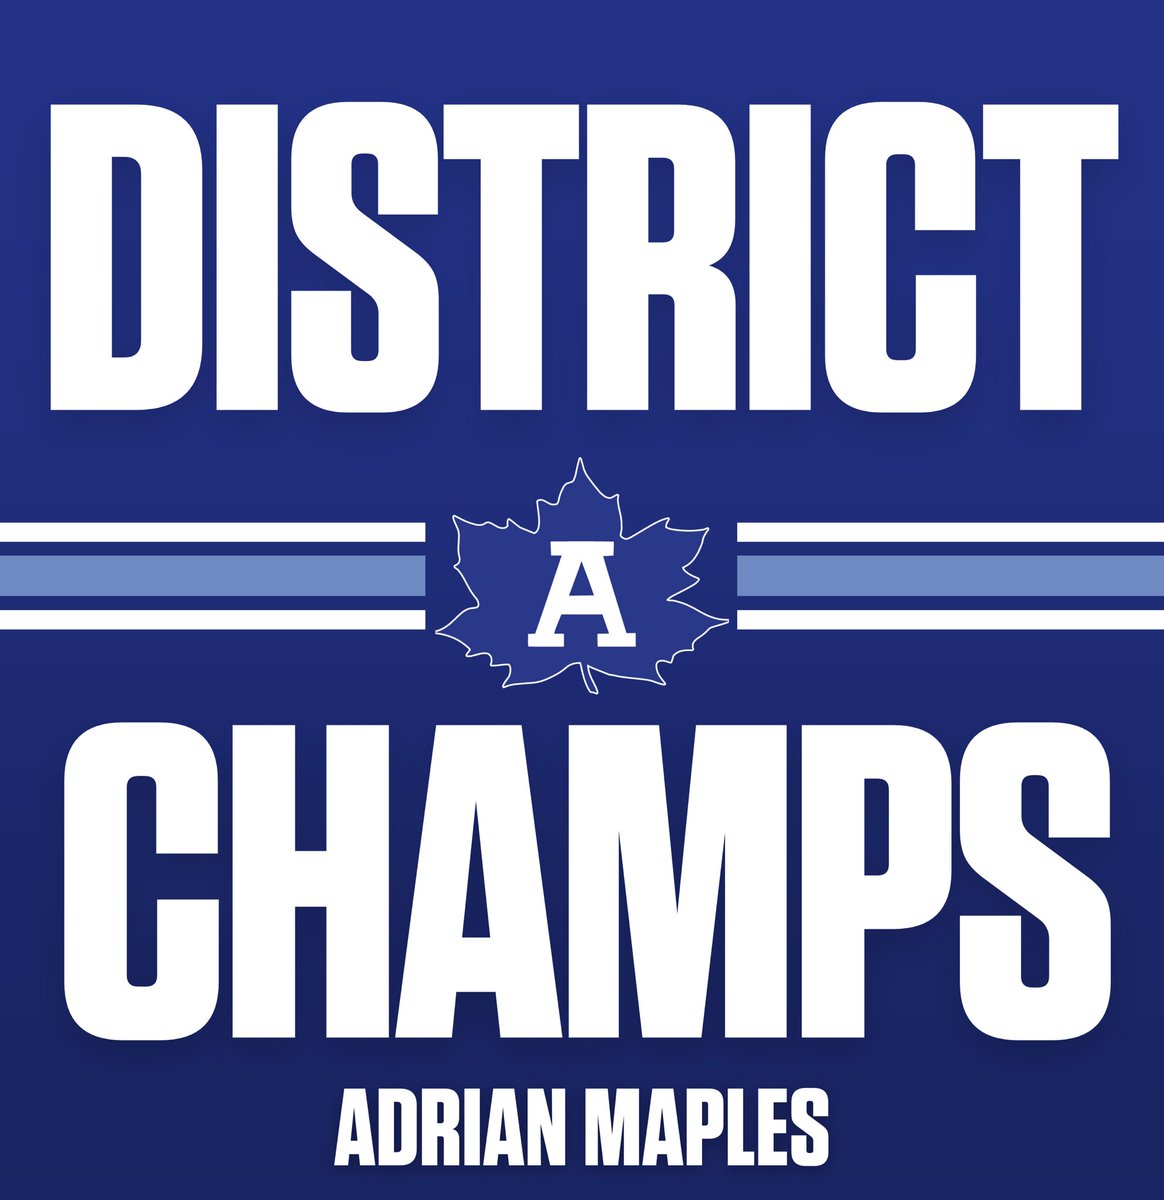 Adrian repeats as District Champs! ⚾️